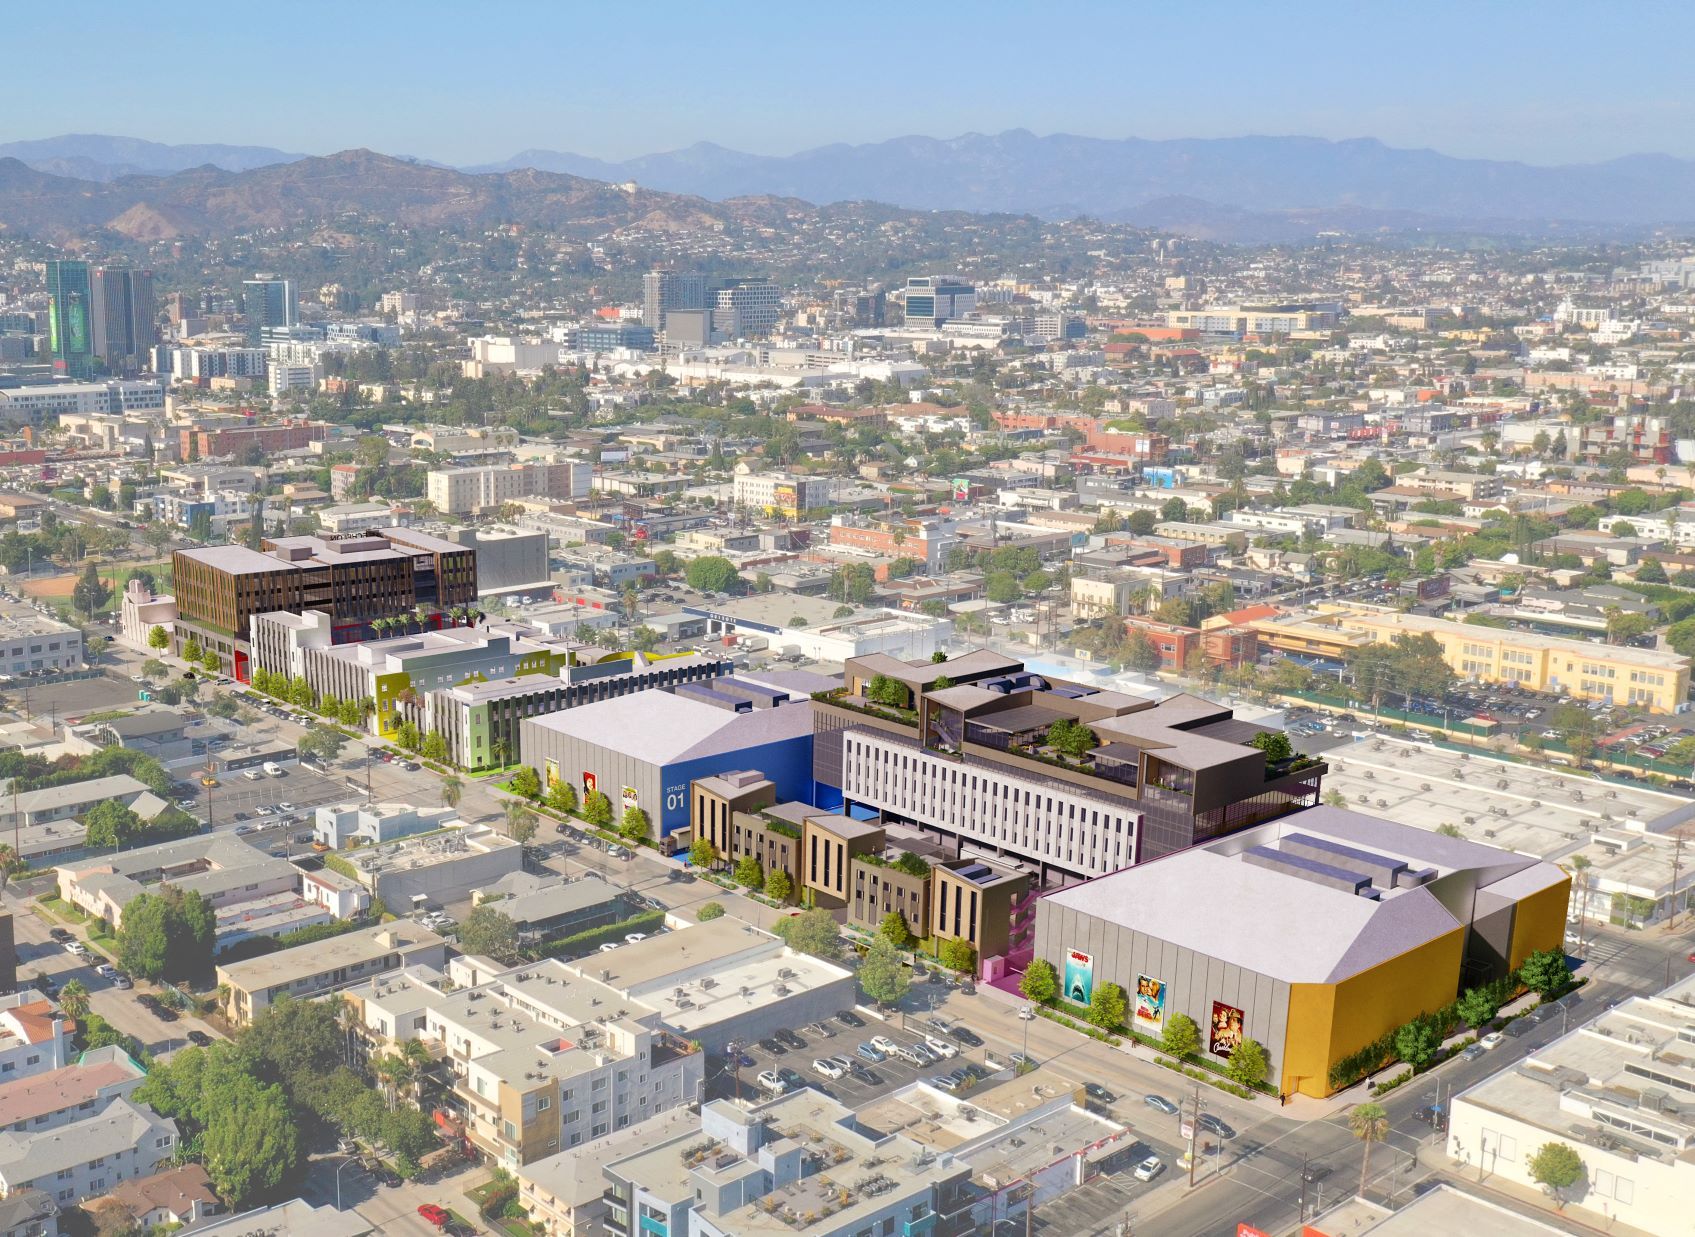 BARDAS and Bain Capital Real Estate Announce Plans to Develop Echelon Television Center, $600 Million State-of-the Art Studio Campus in Hollywood